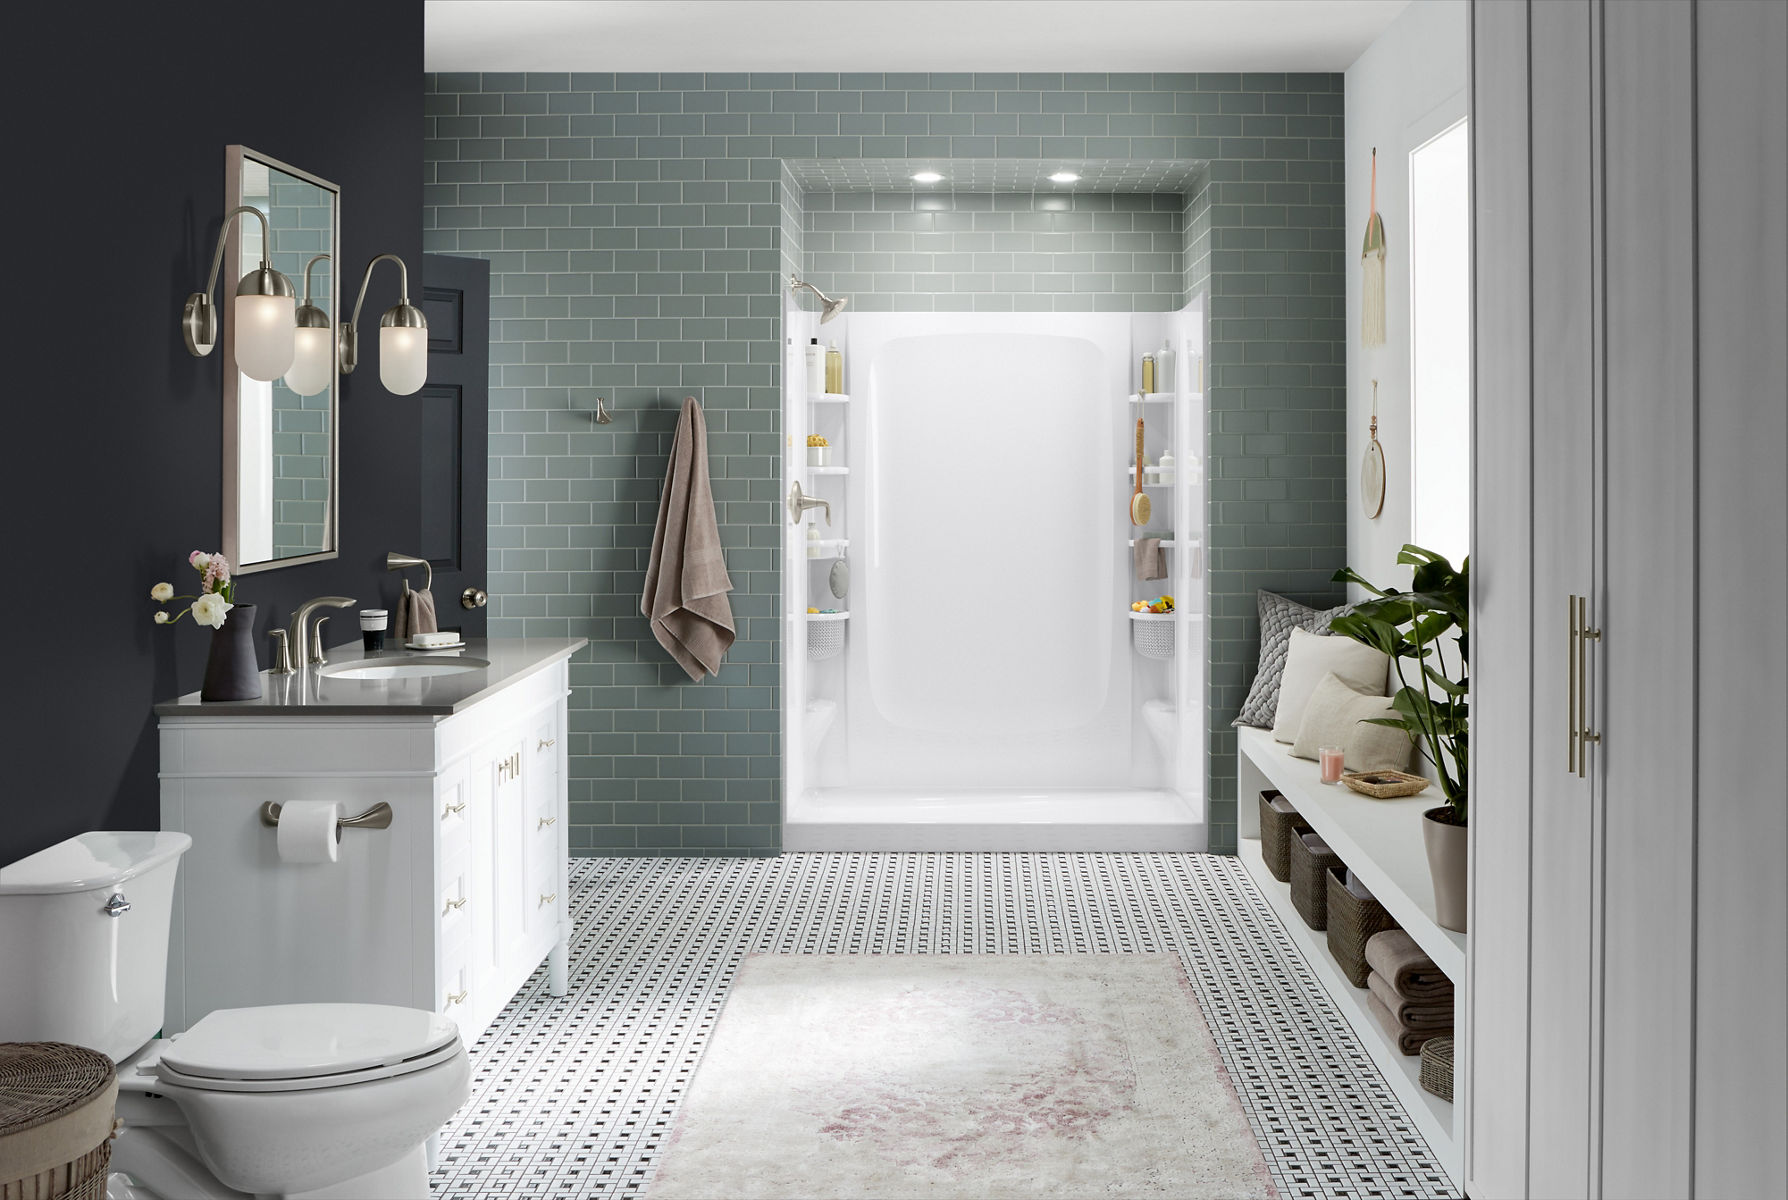 A white three-wall shower stall with white base installed in a room with gray tile.